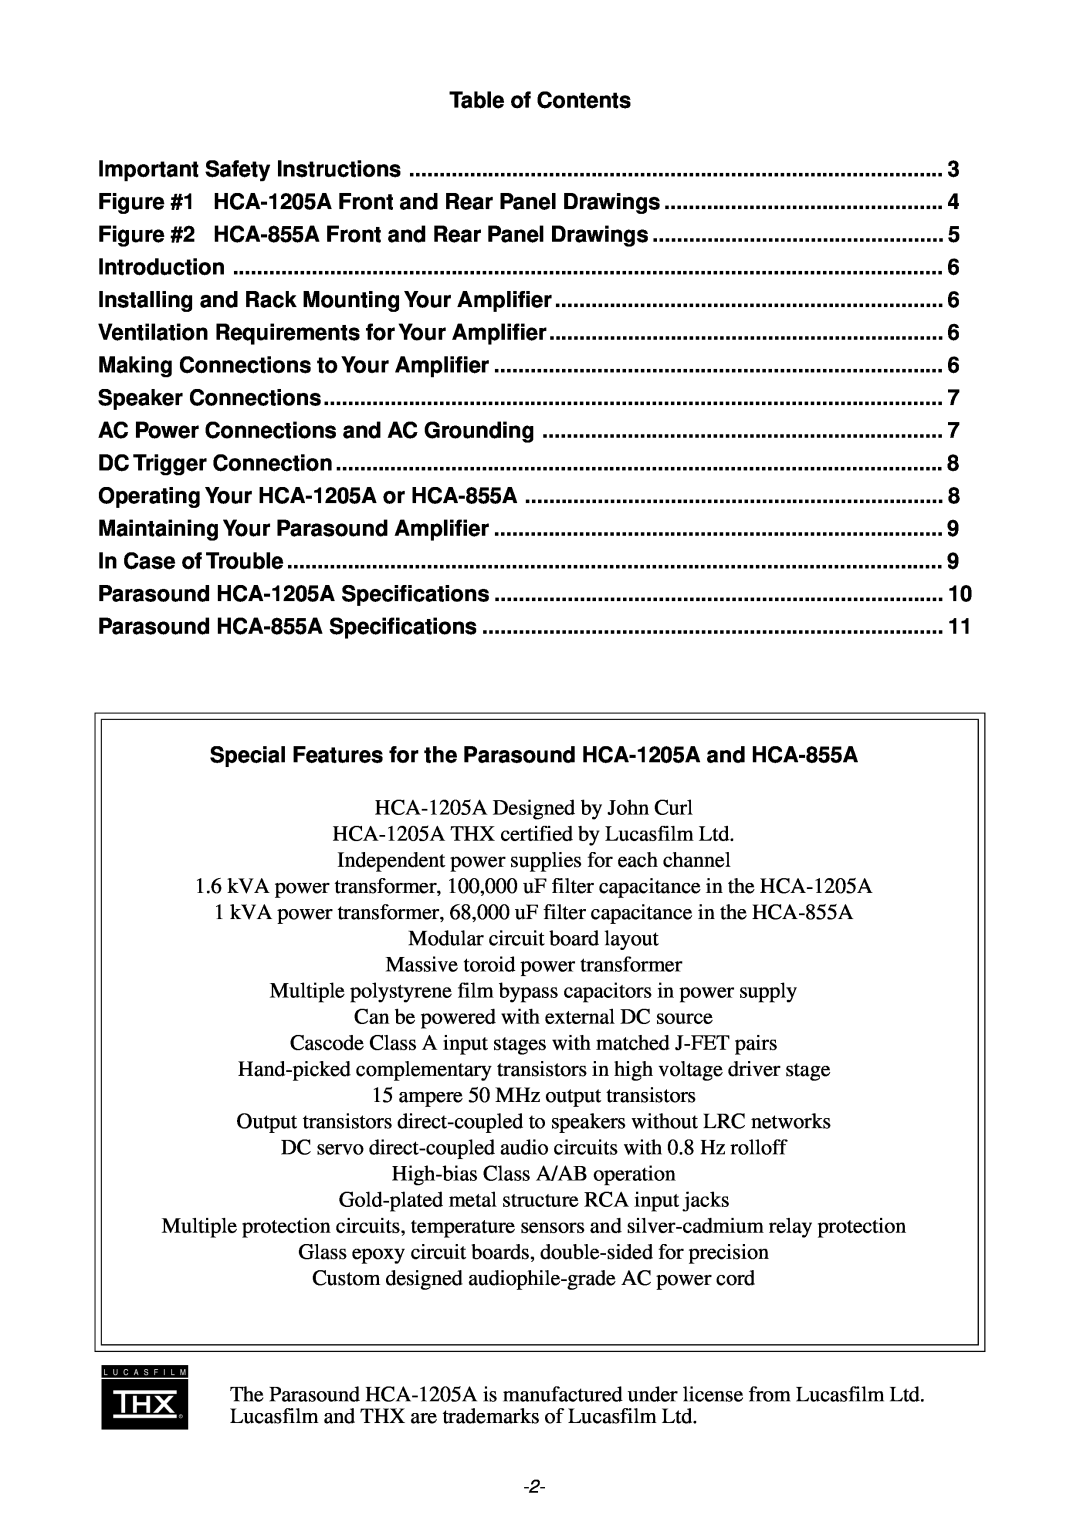 Parasound HCA-1205A owner manual Table of Contents 